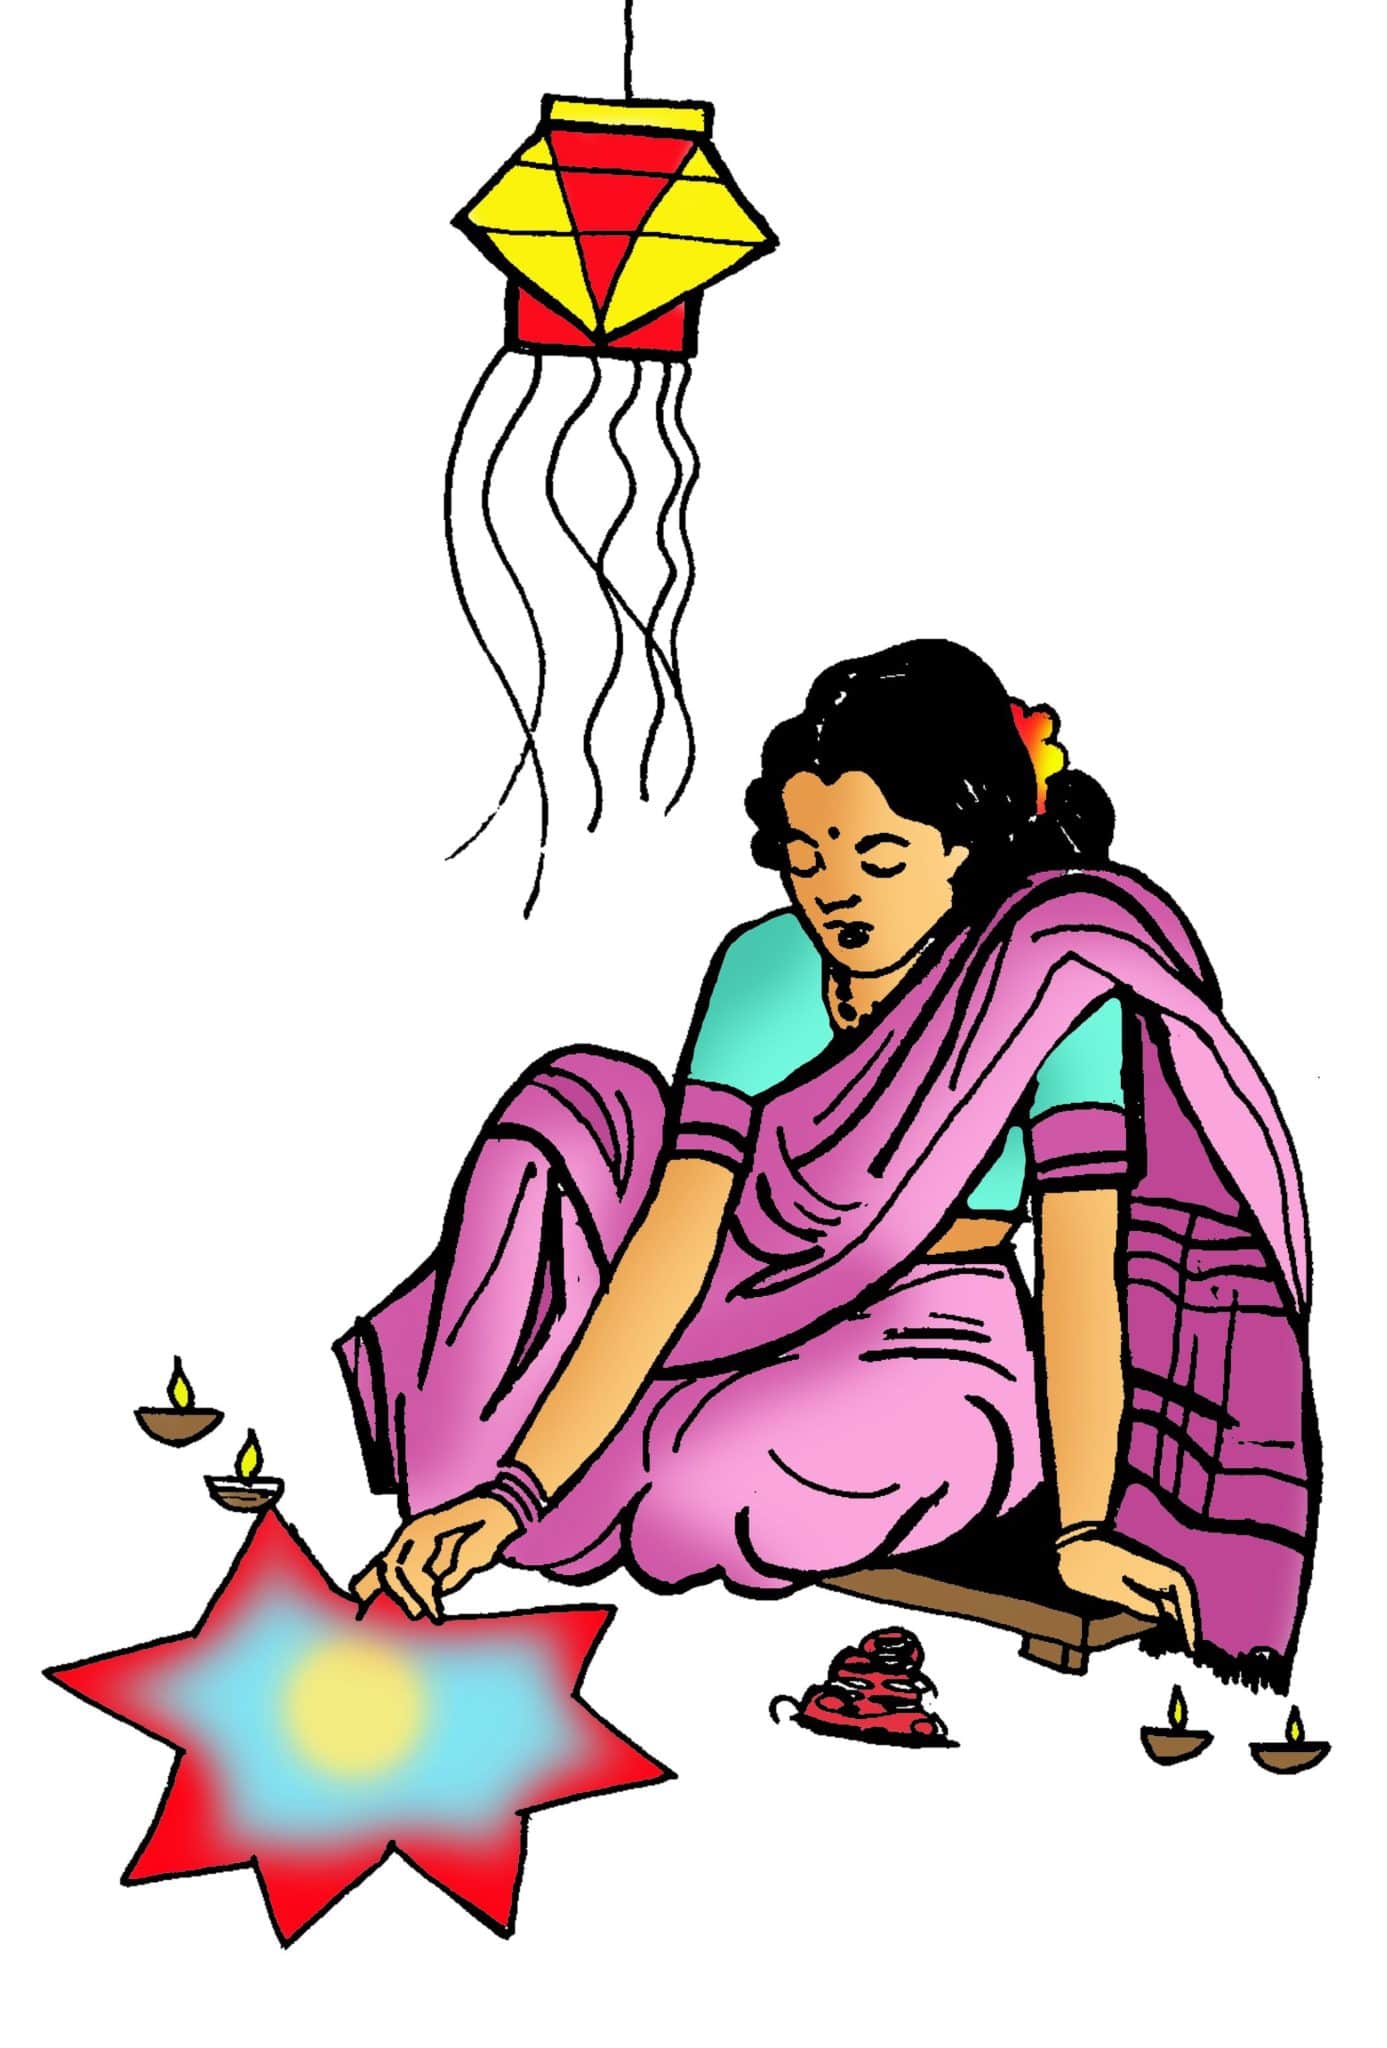 diwali-lakshmi-pooja-festival-meaning-stories-and-traditions